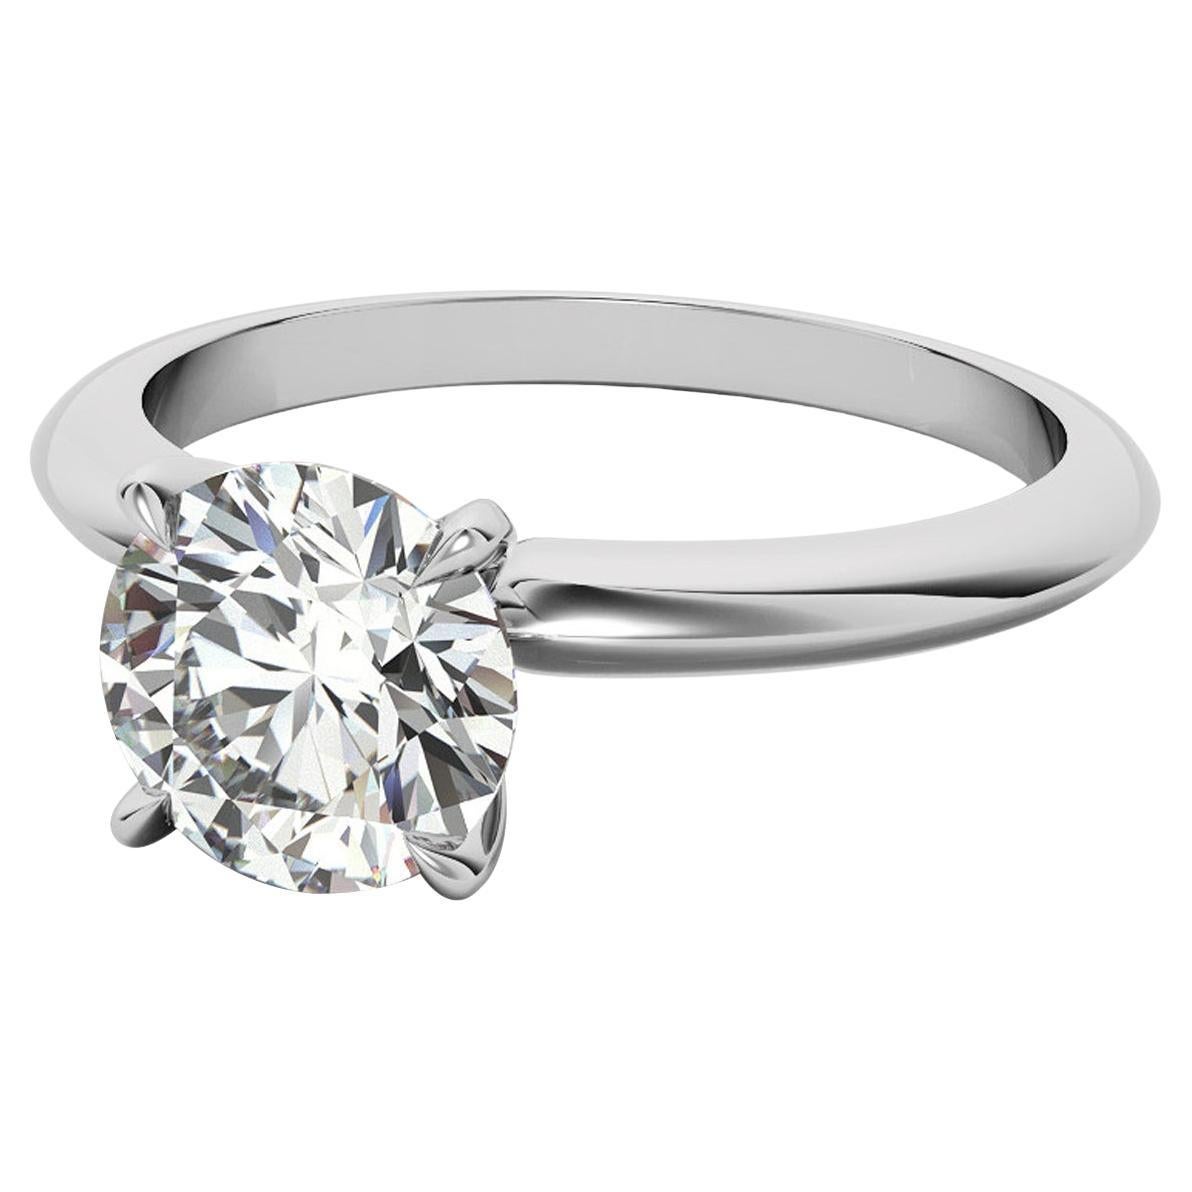 2.41 Carat Natural Round Diamond Ring 4-Prong Tiffany Style in 14K White Gold For Sale